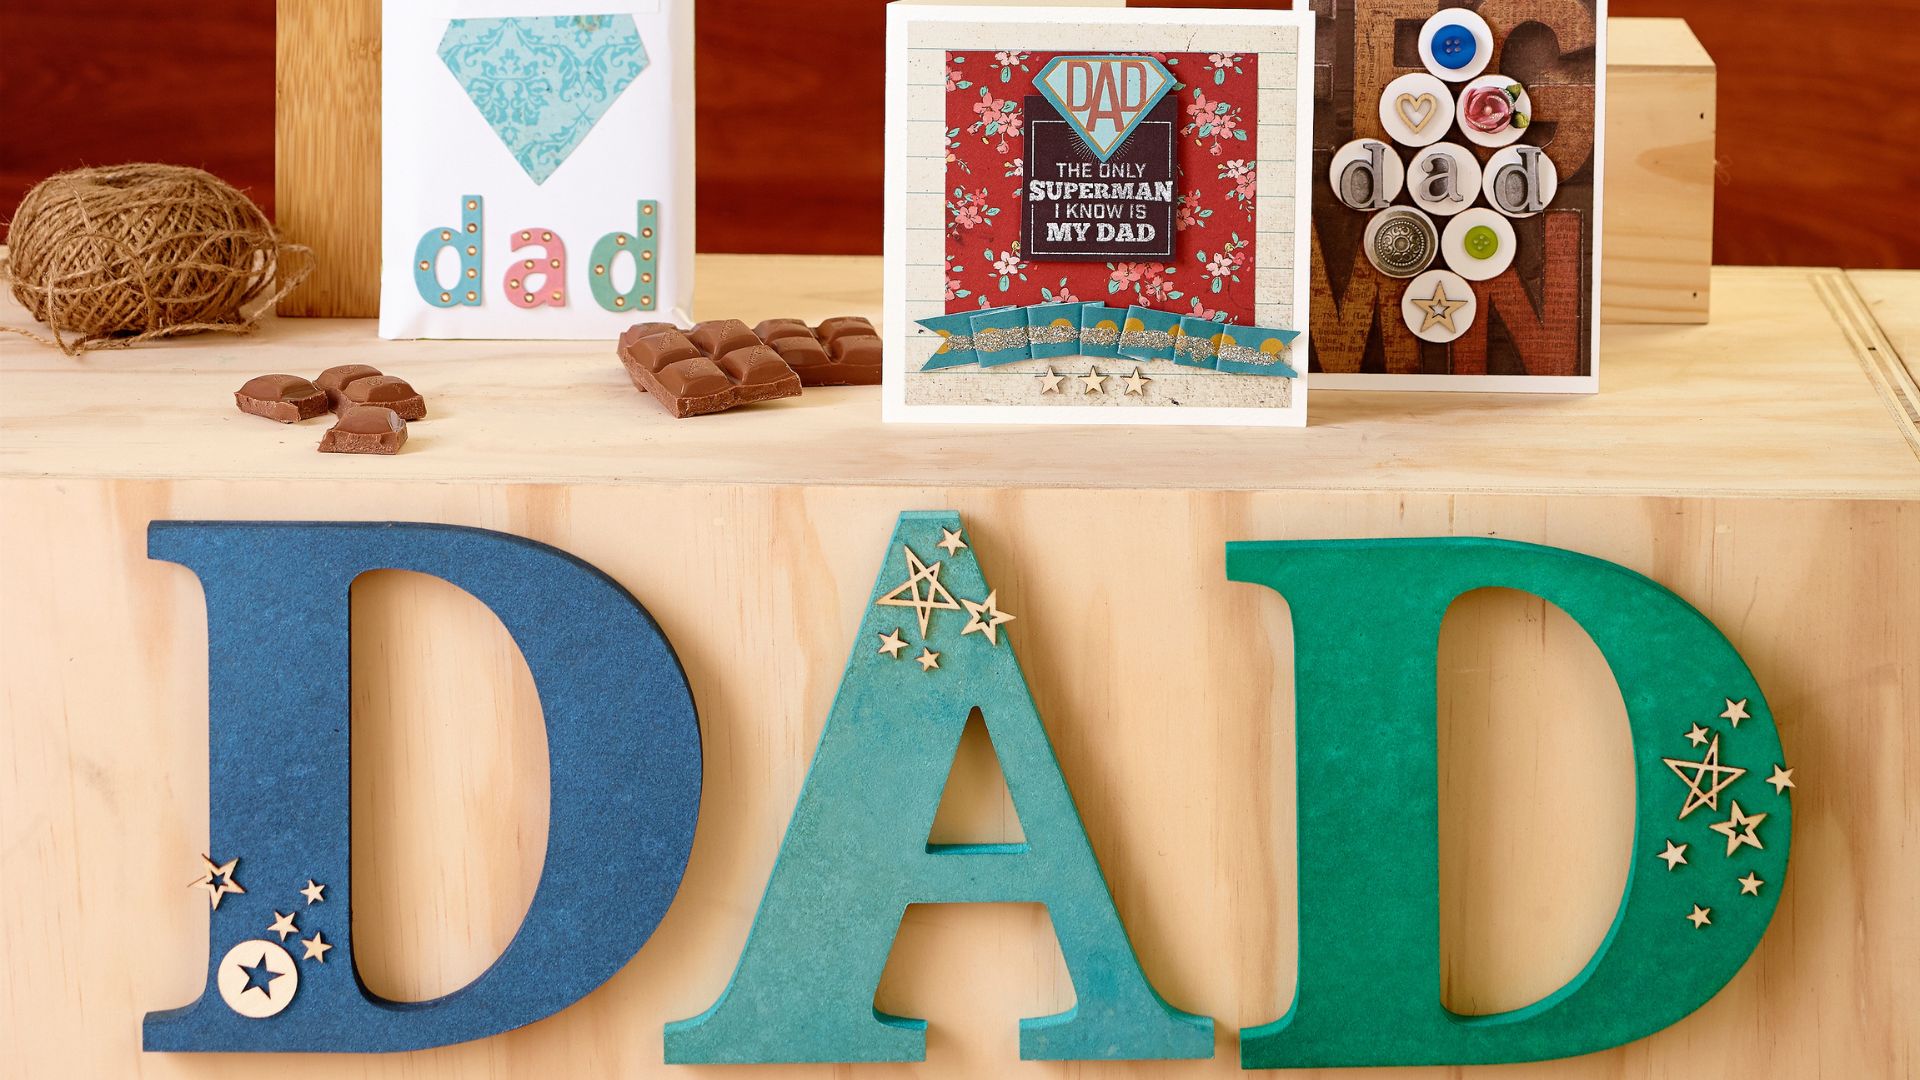 5 DIY Father’s Day Gifts For Dad